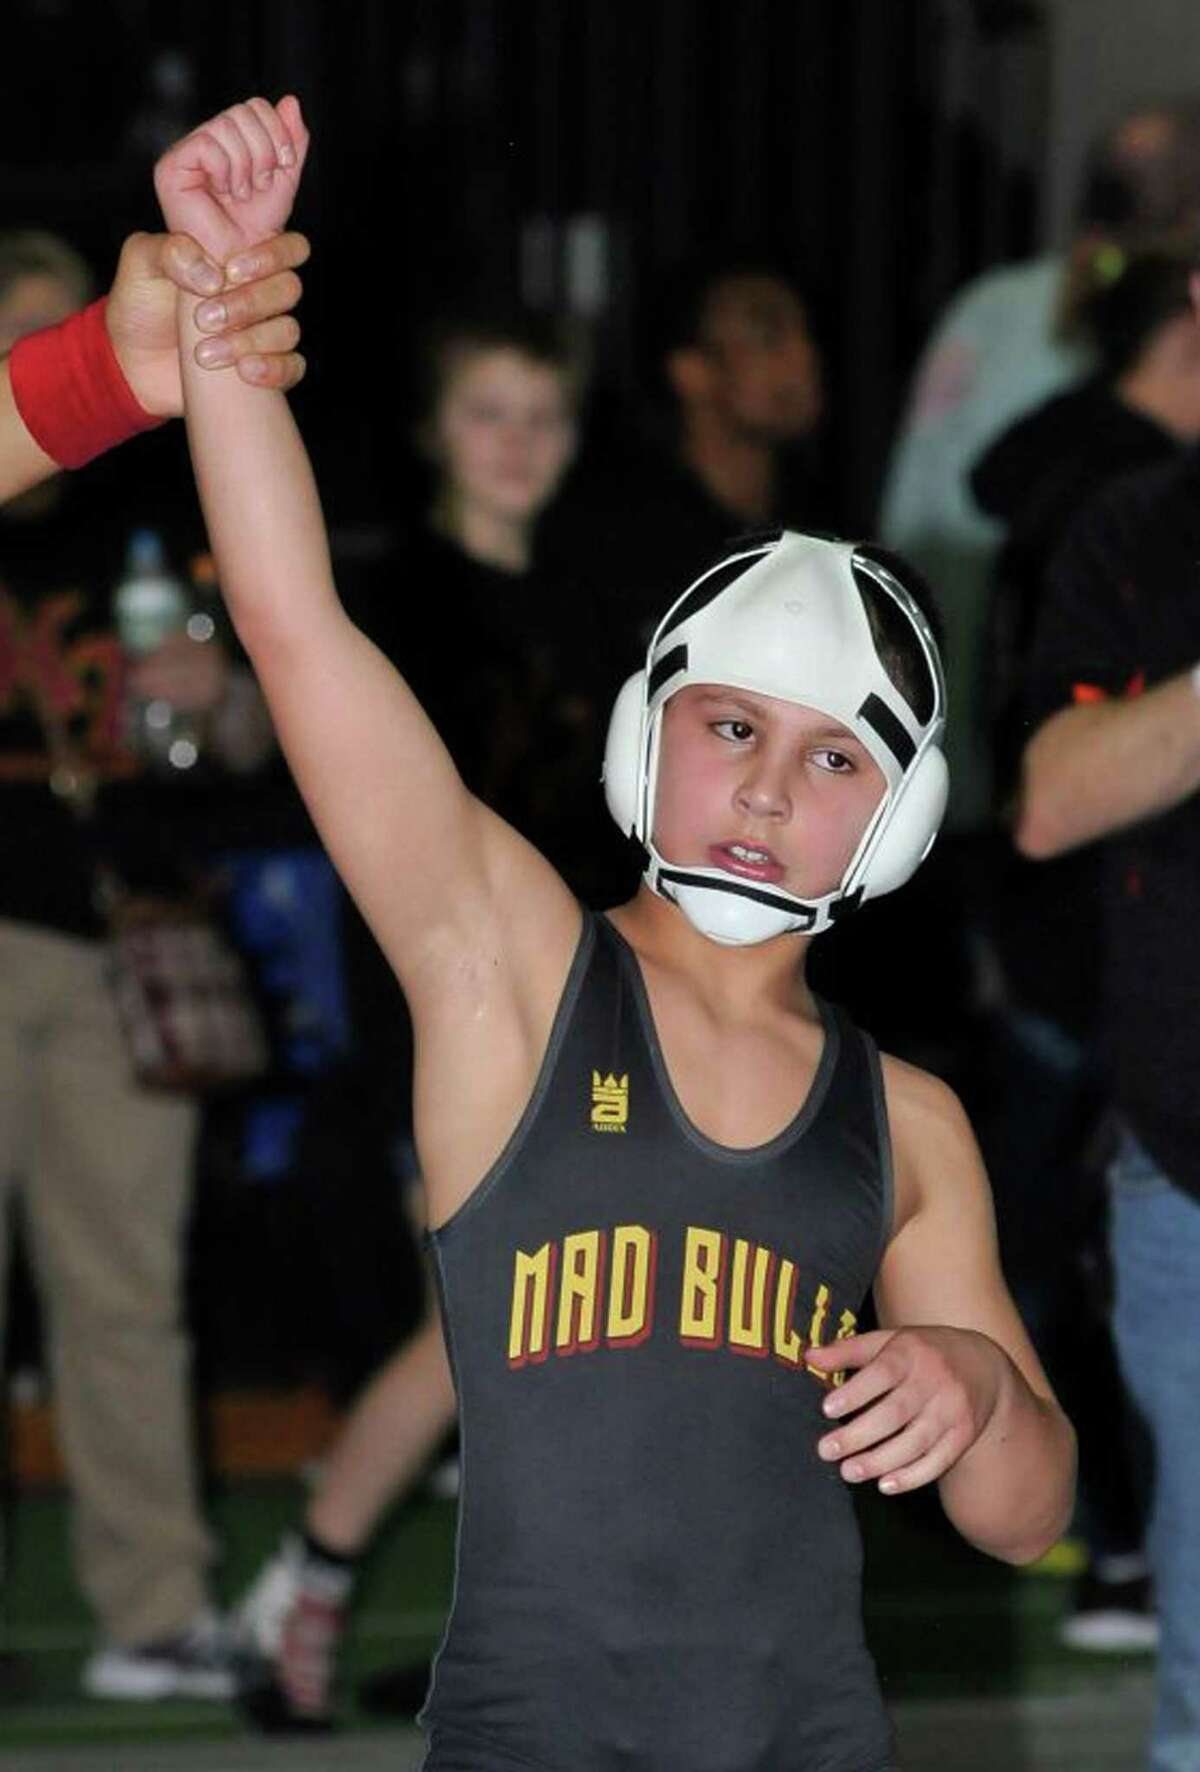 Carlo Tucci celebrates his third consecutive state title as a member of the Norwalk Mad Bulls wrestling team.